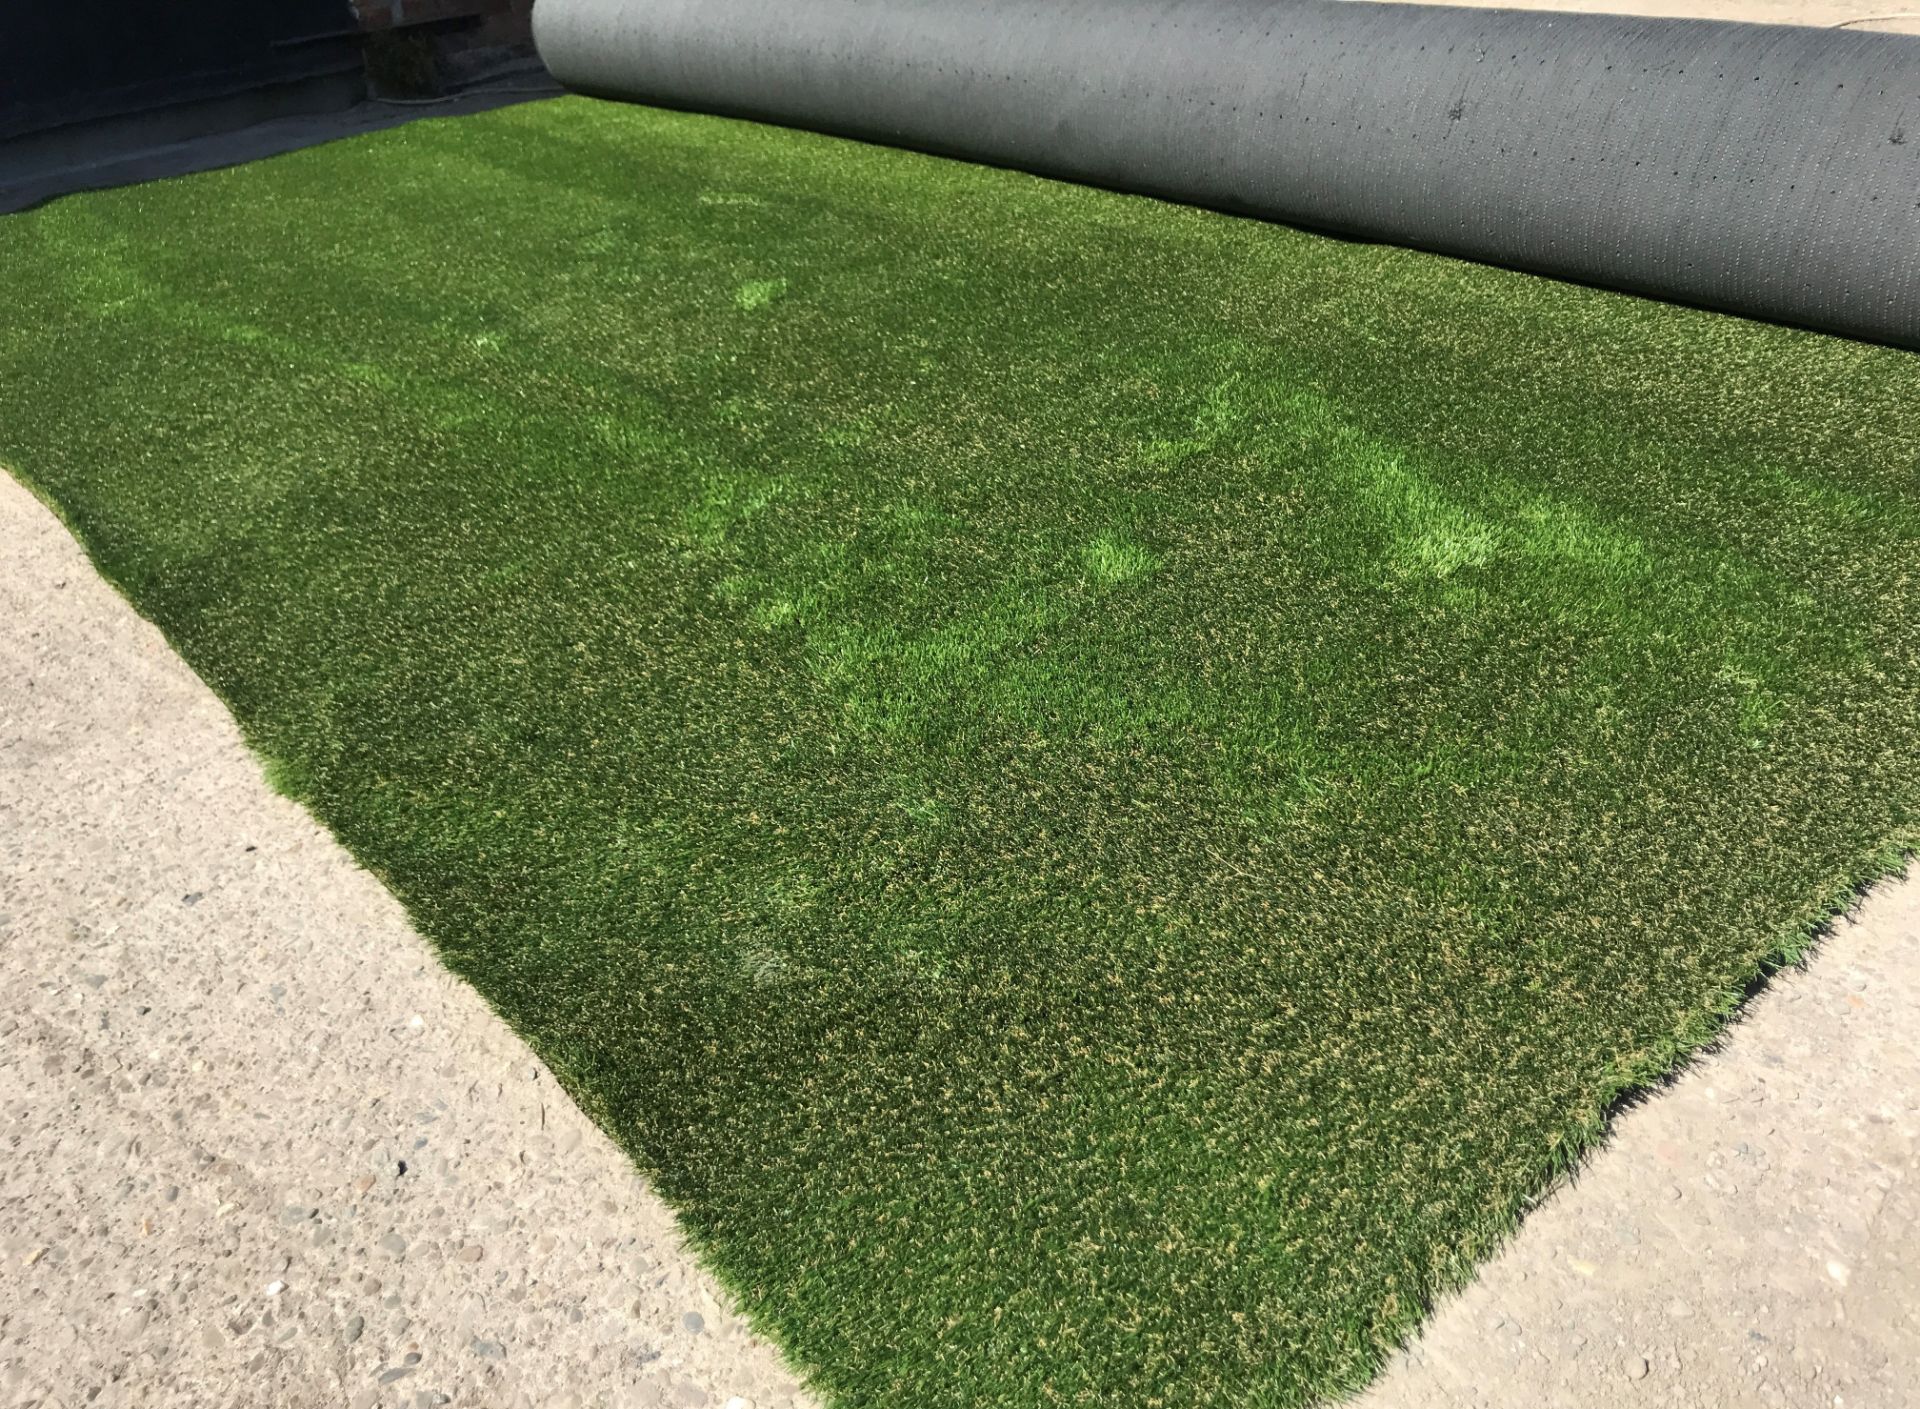 1 x Playrite Nearly Grass - Artificial Grass/Turf - 30X4 Meter Roll - Ref: NWF022 - CL912 - NO VAT - Image 2 of 6